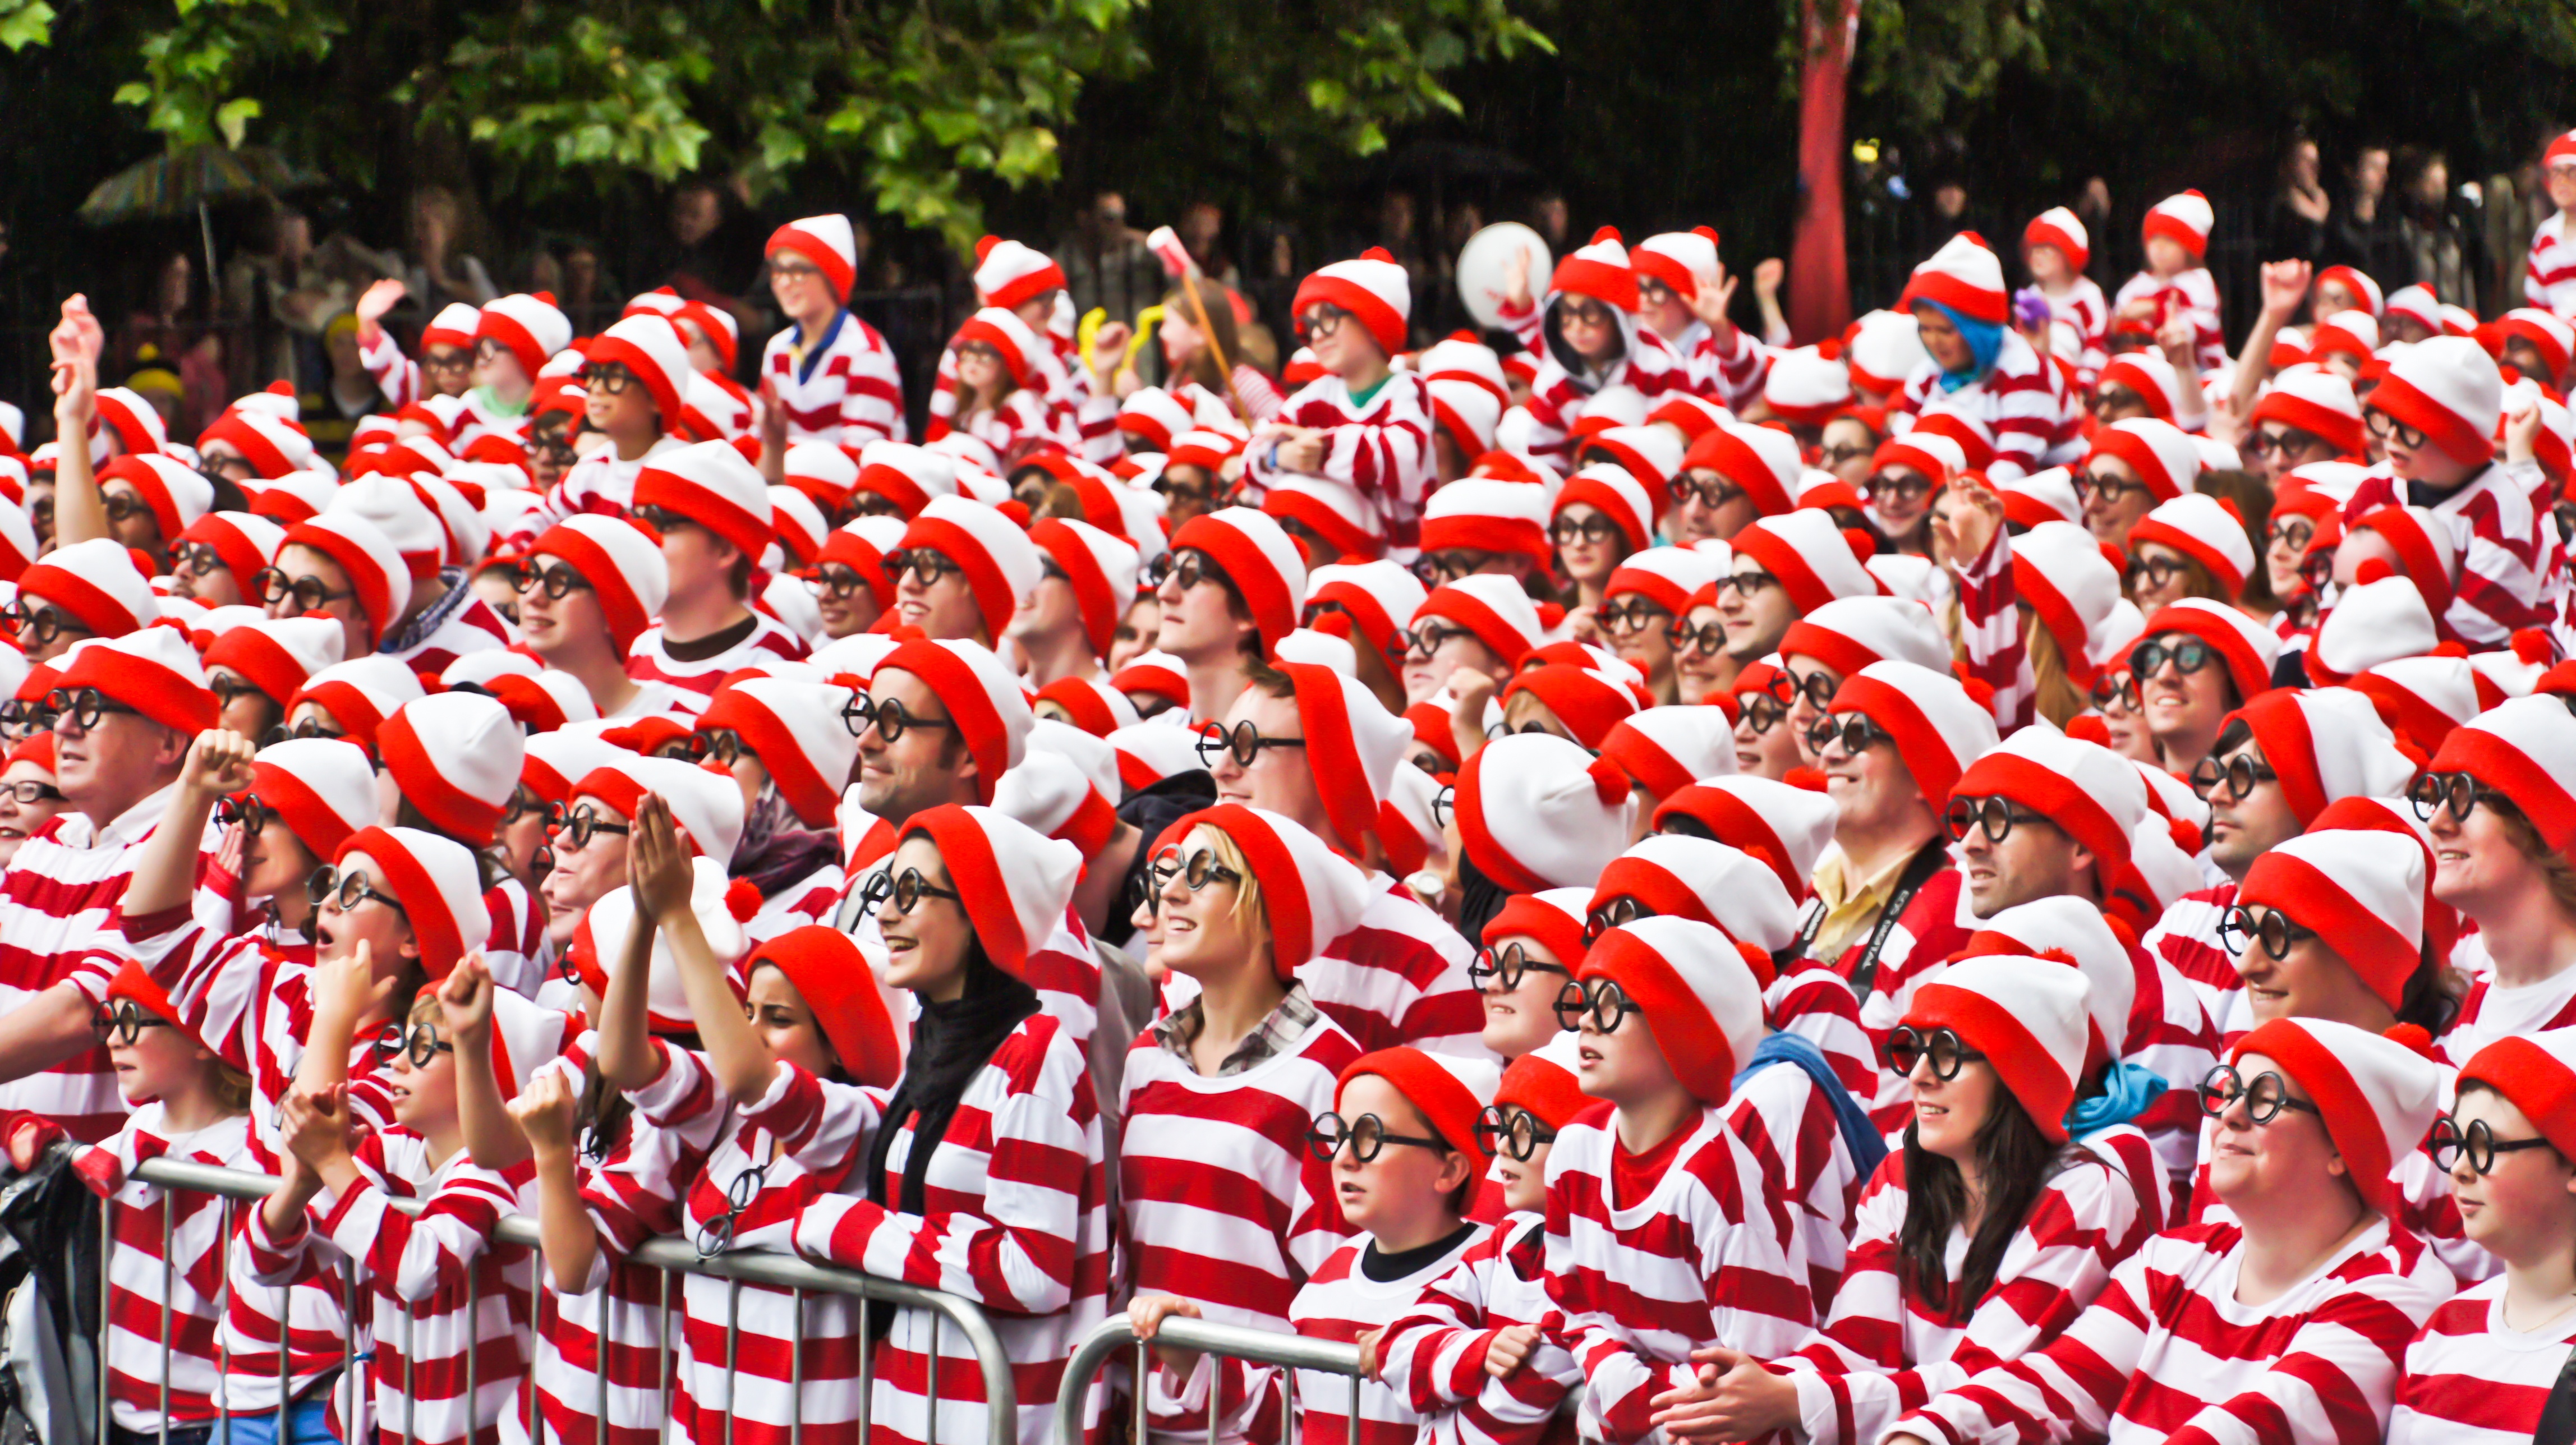 Finding Waldo: Easier Than Finding Consumer Insights?